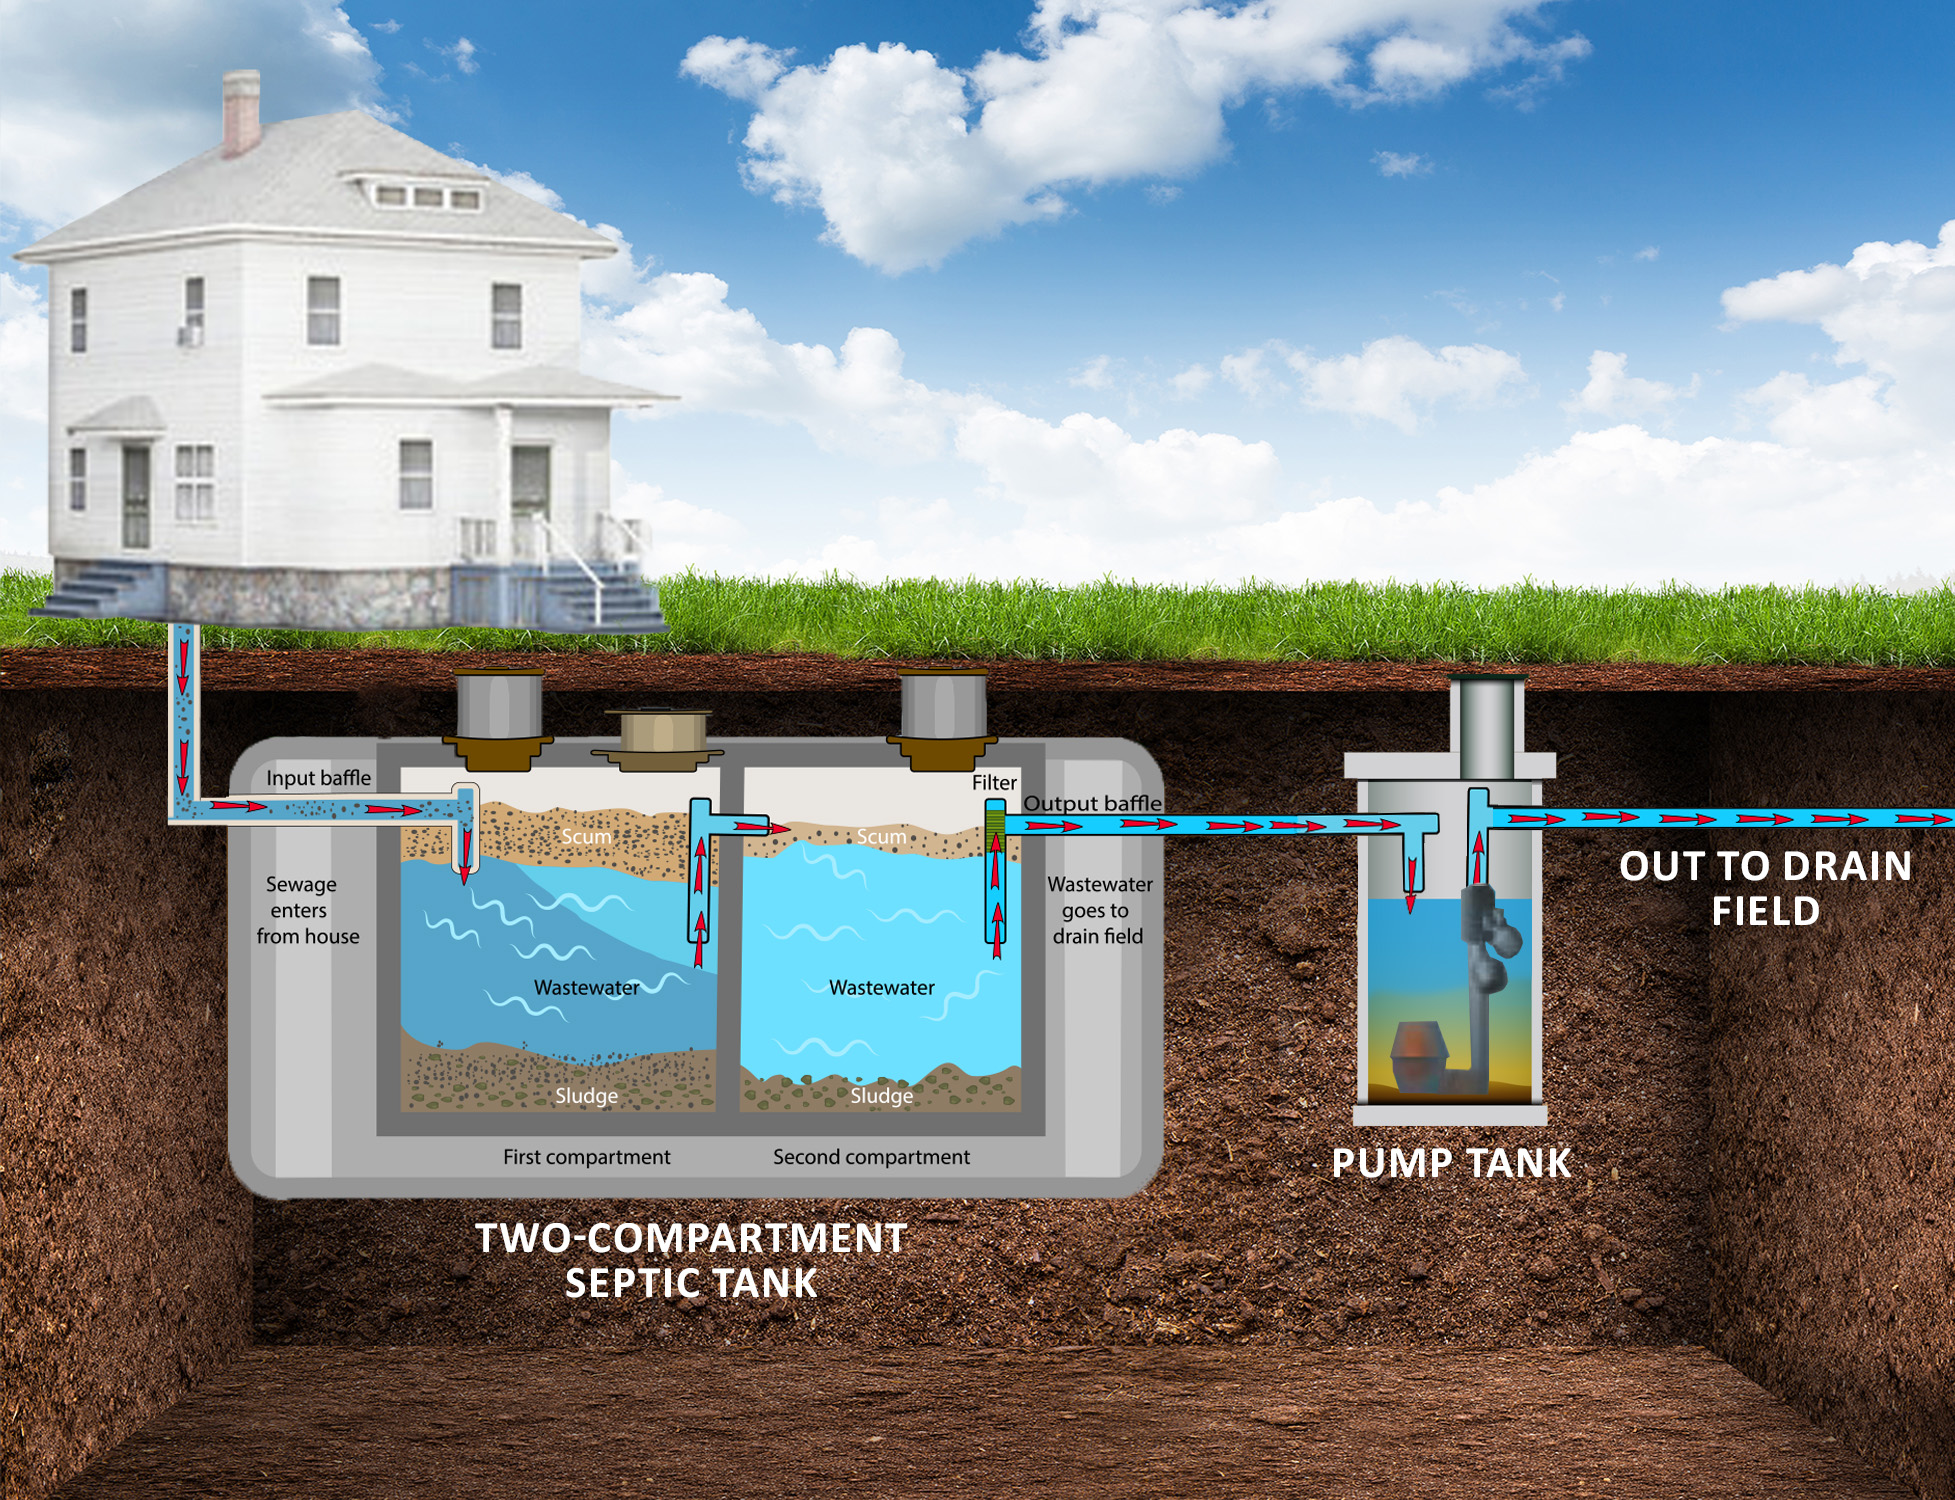 Signs Your Septic Pump Needs Maintenance - Understanding septic system alarm activation